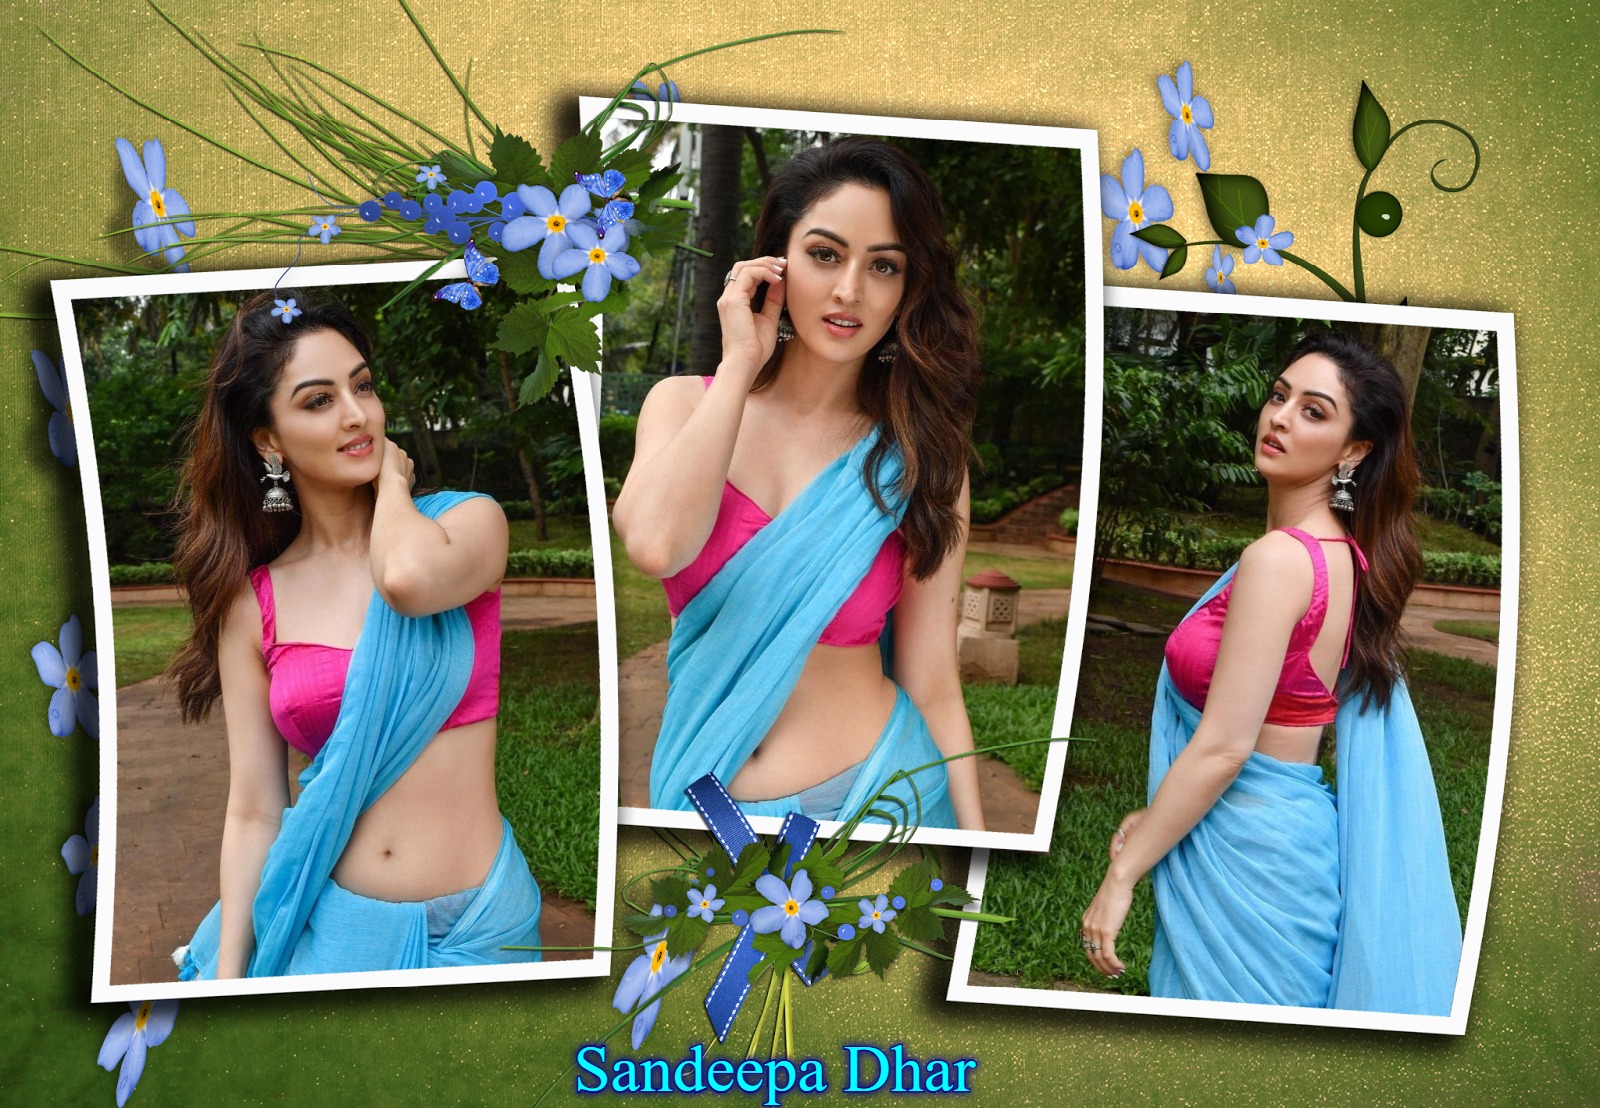 Read more about the article “Sandeepa Dhar- In Pursuit of A Higher Place”